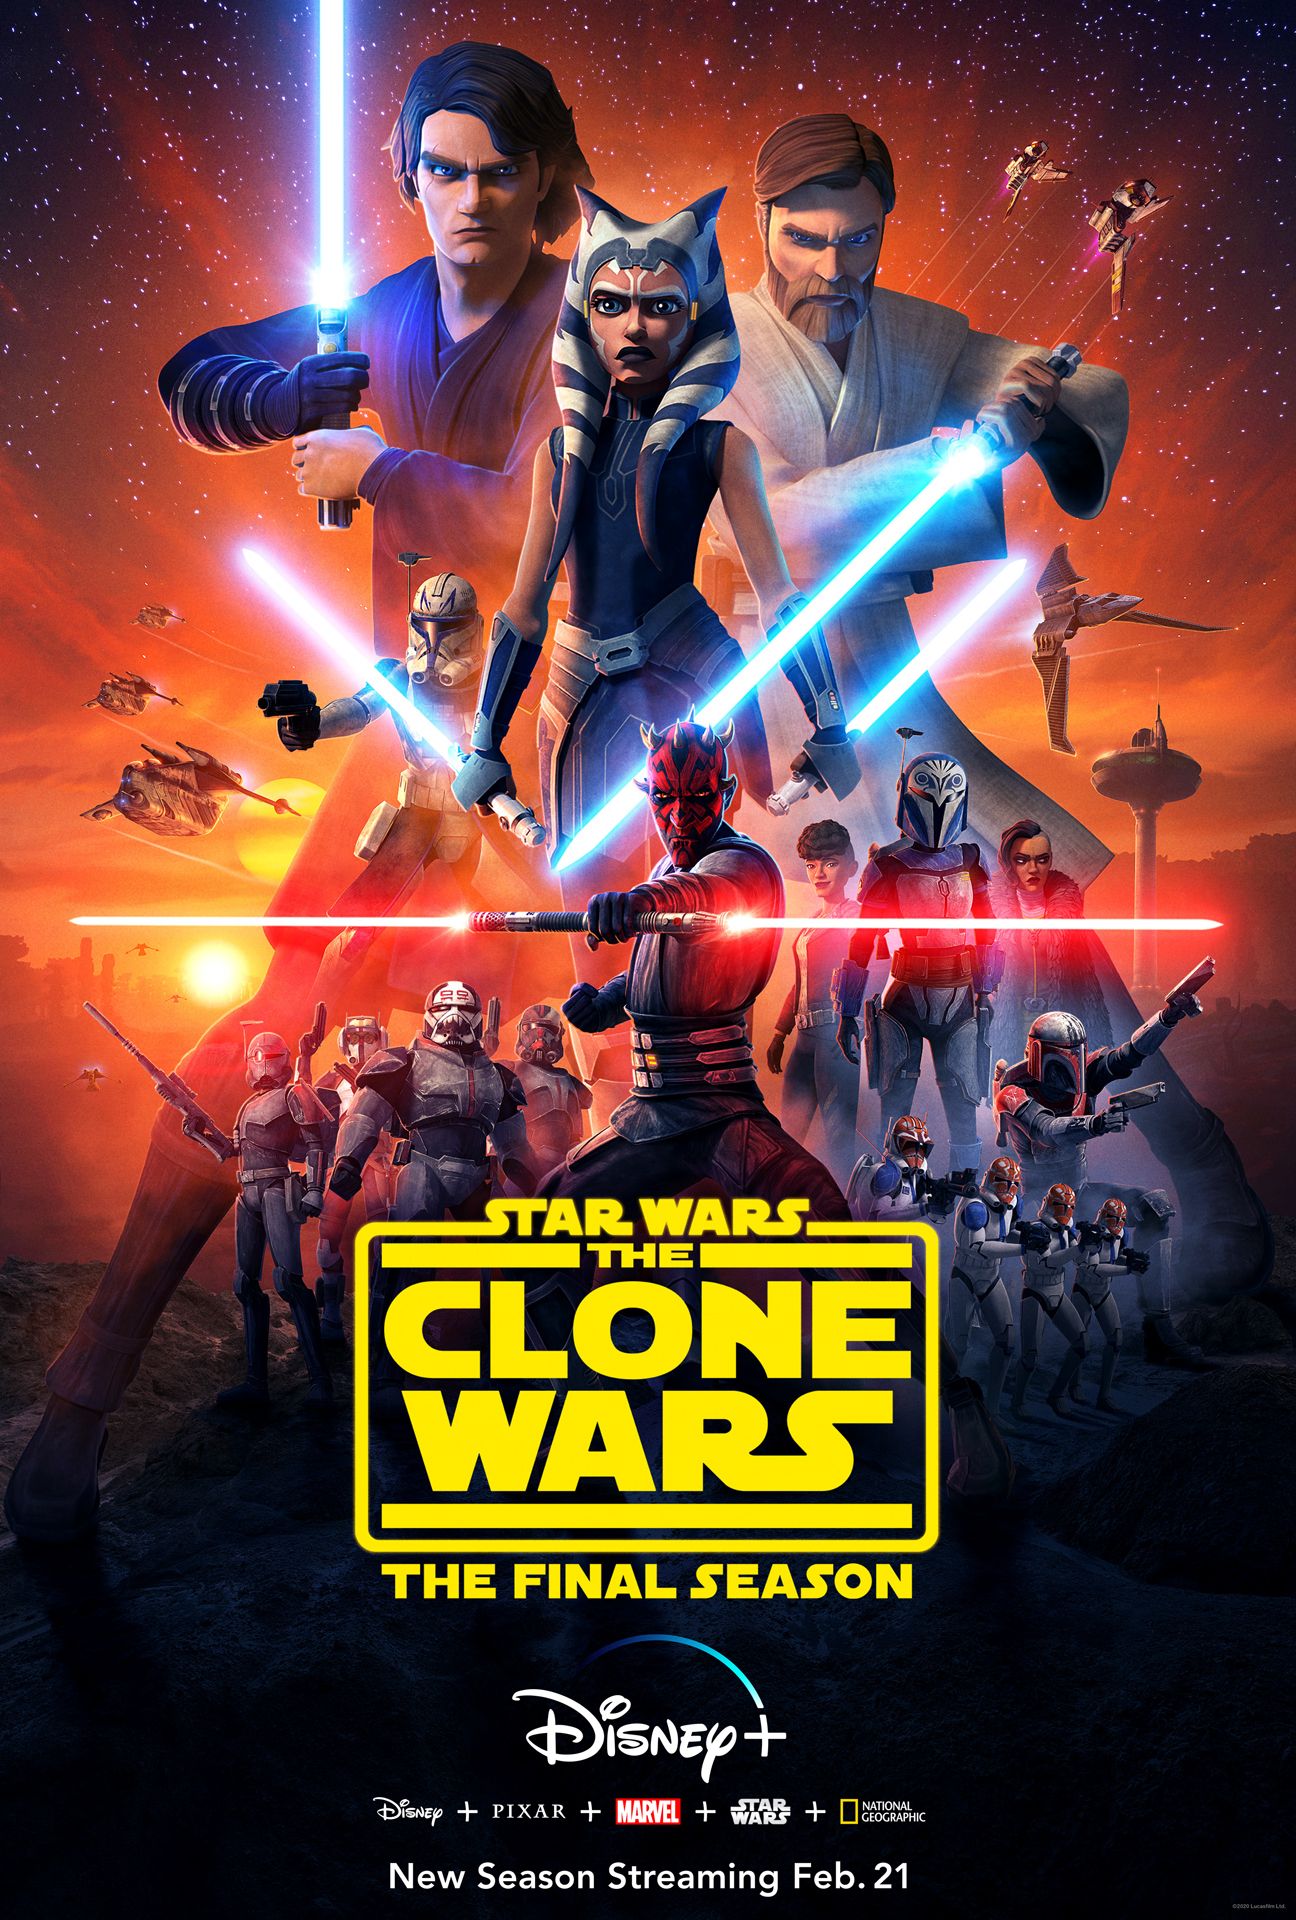 Star Wars The Clone Wars TV Show Poster